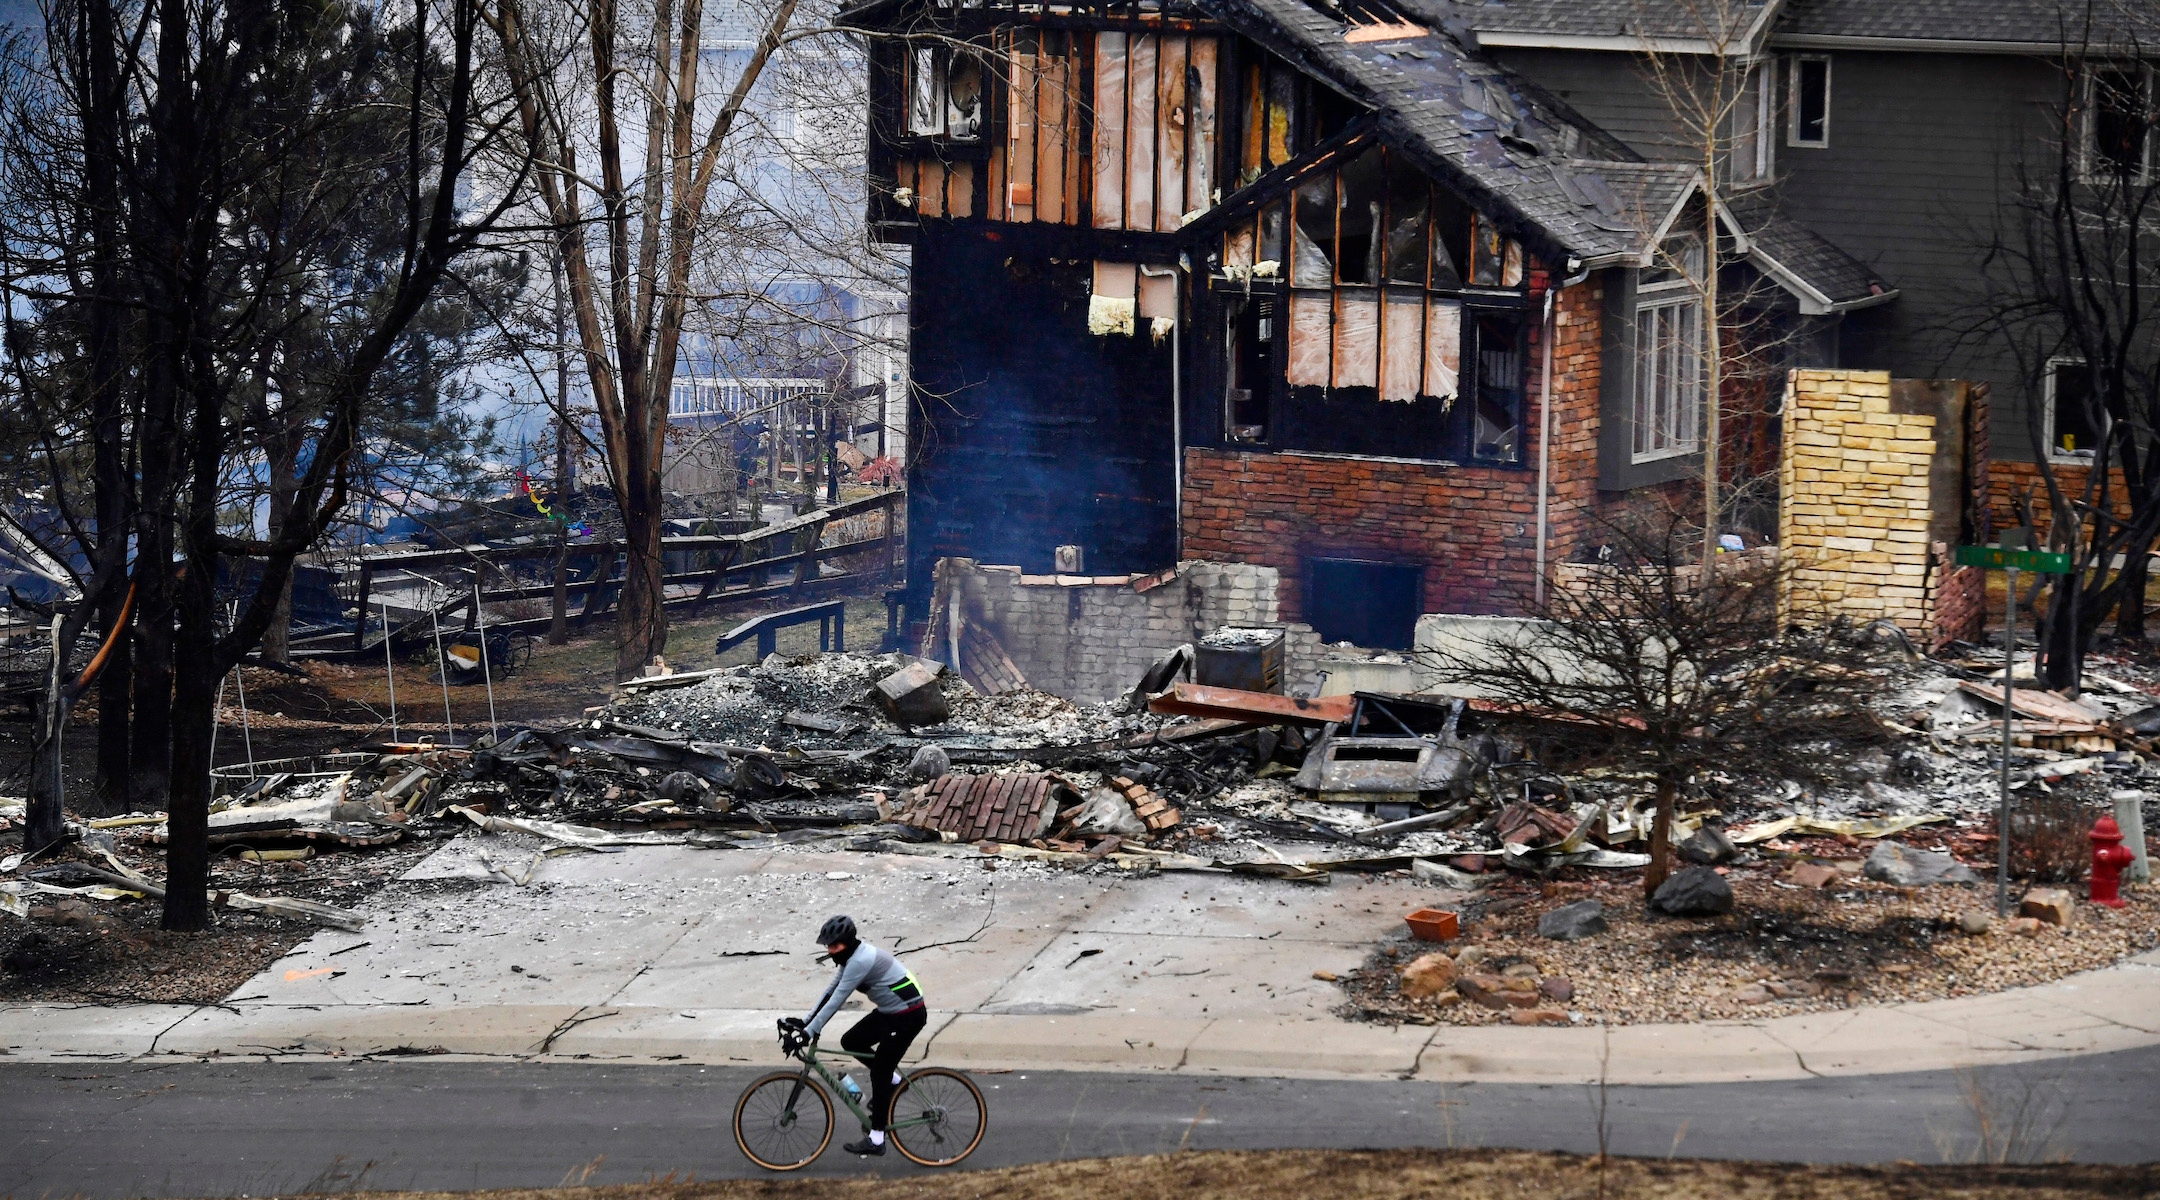 A man on a bike rides by a burned home